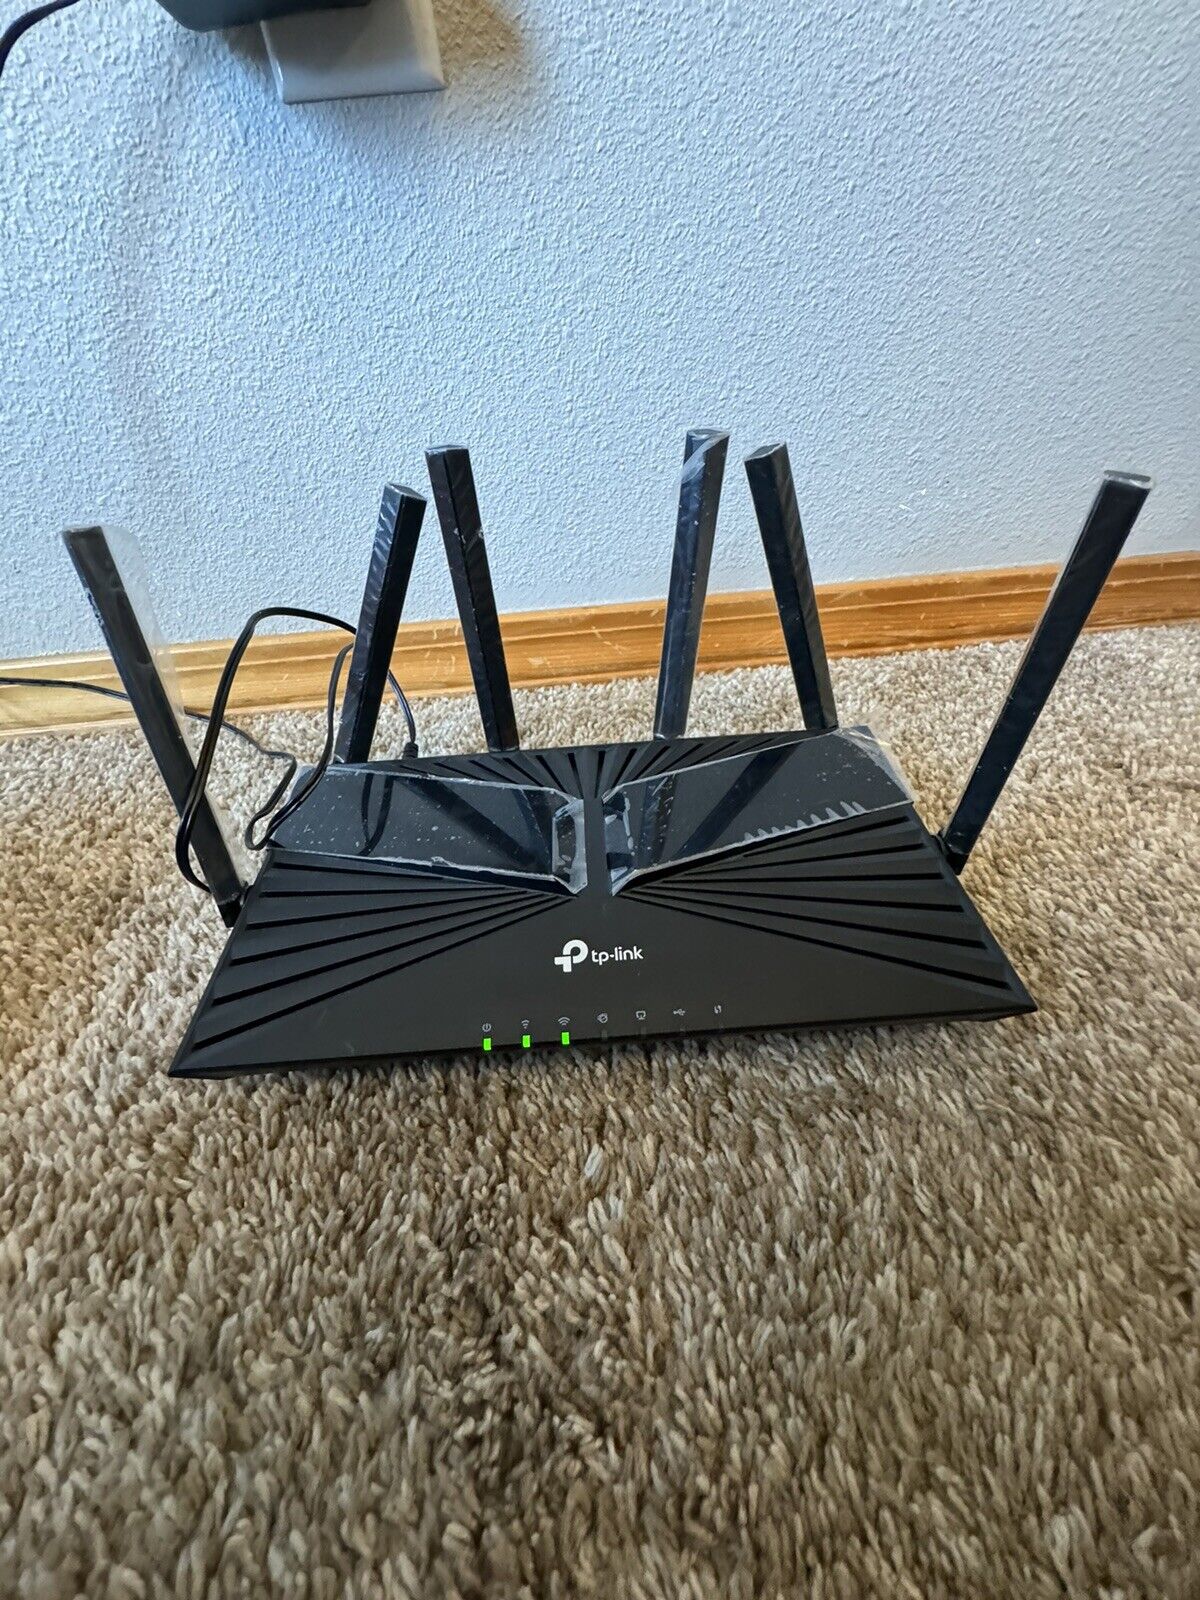 TP-Link Archer AX4400 Mesh Dual Band 6-Stream Router WiFi Black - WORKS, NICE